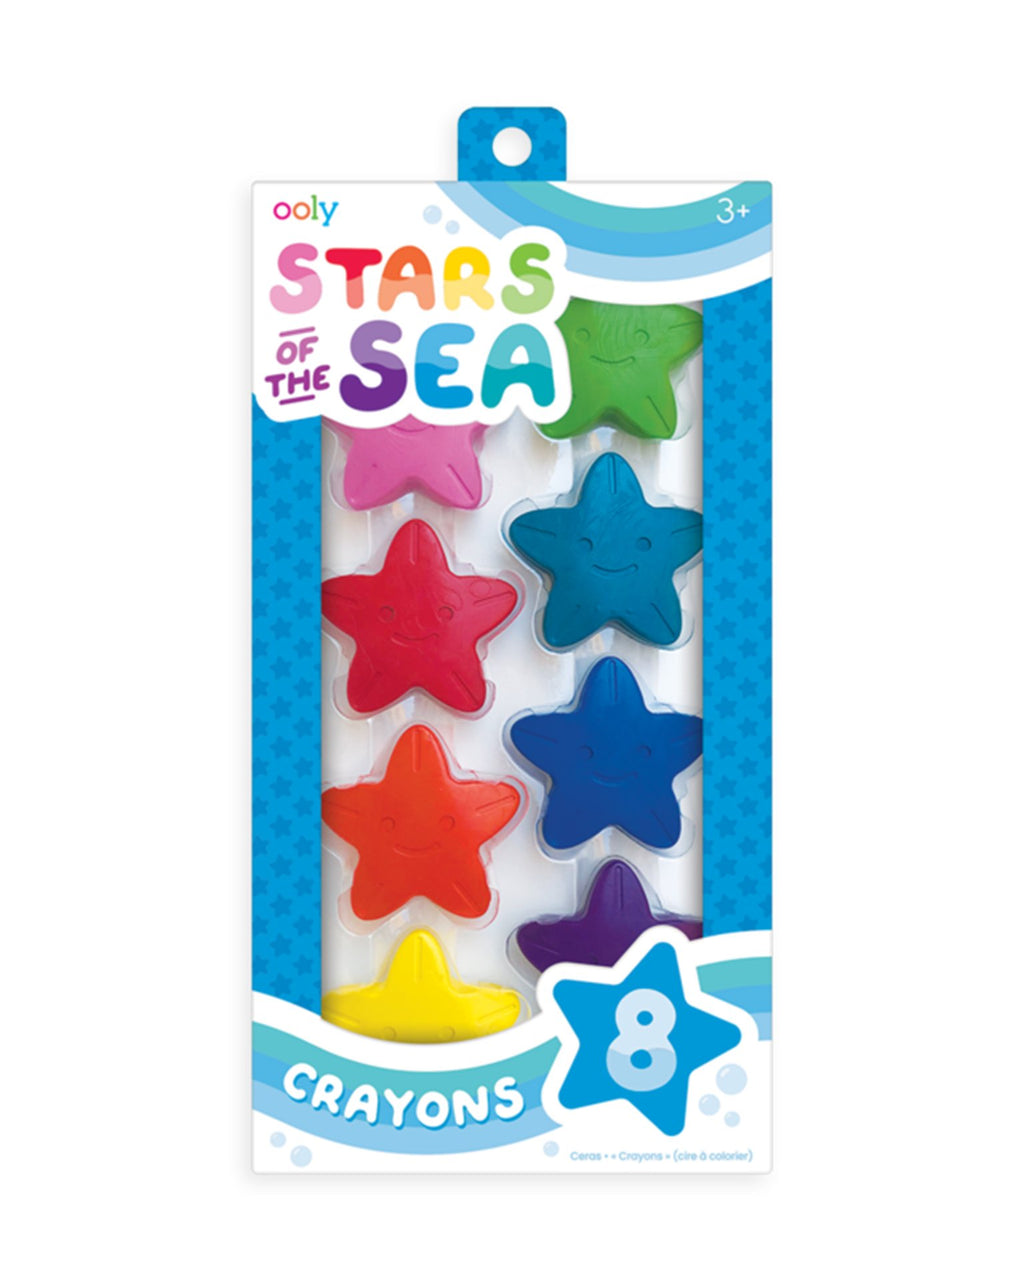 OOLY Stars of the Sea Crayons - Set of 8